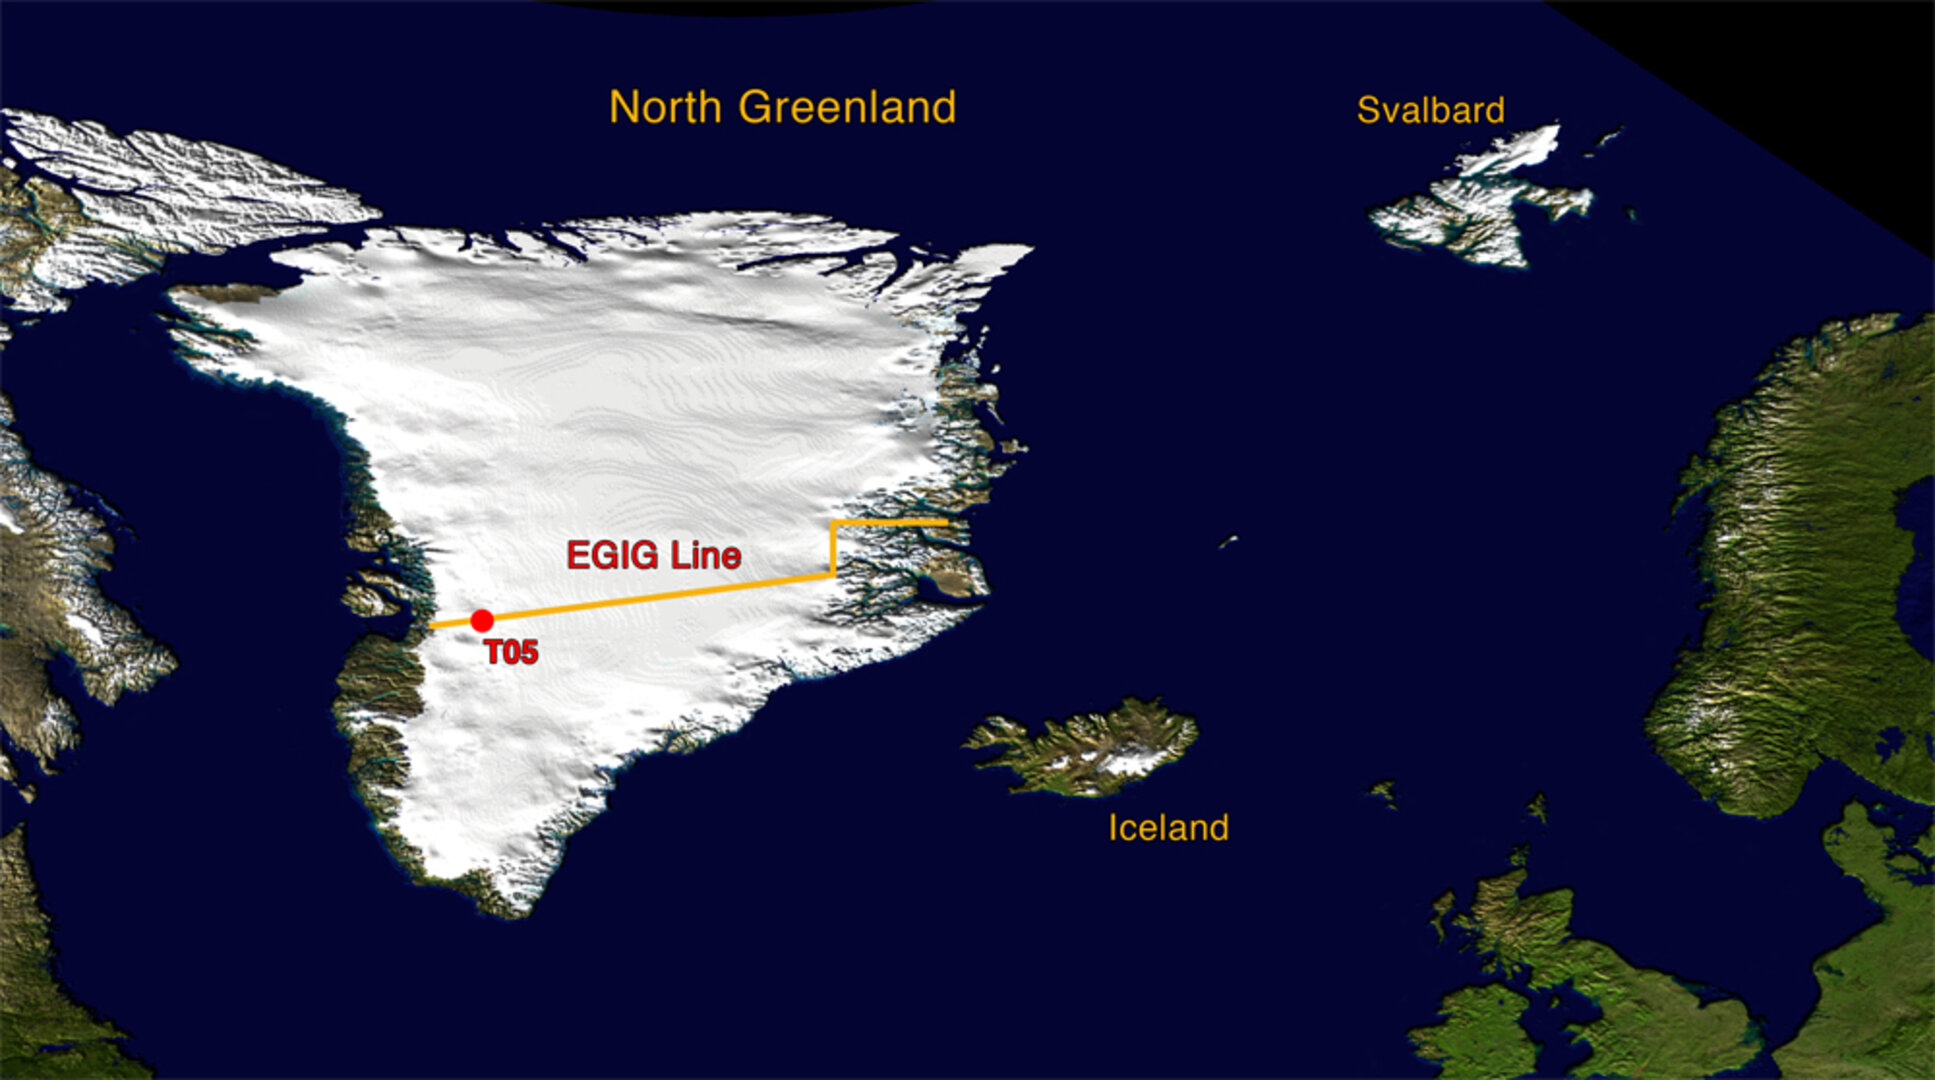 Greenland, showing EGIG line and site of T05